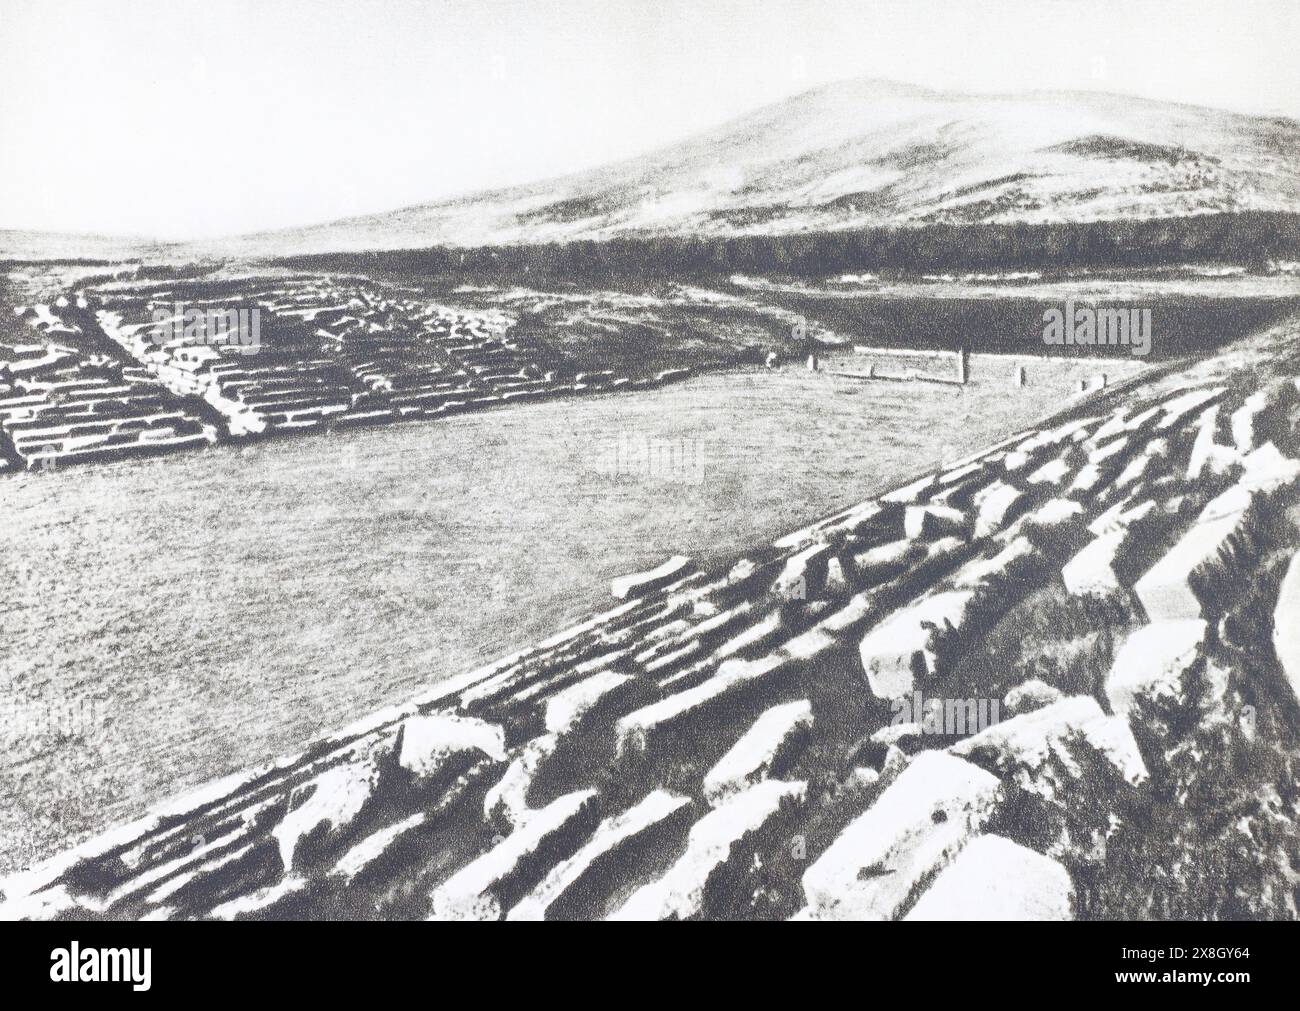 Ancient Stadium in Epidaurus, Greece. Photography from the mid-20th century. Stock Photo